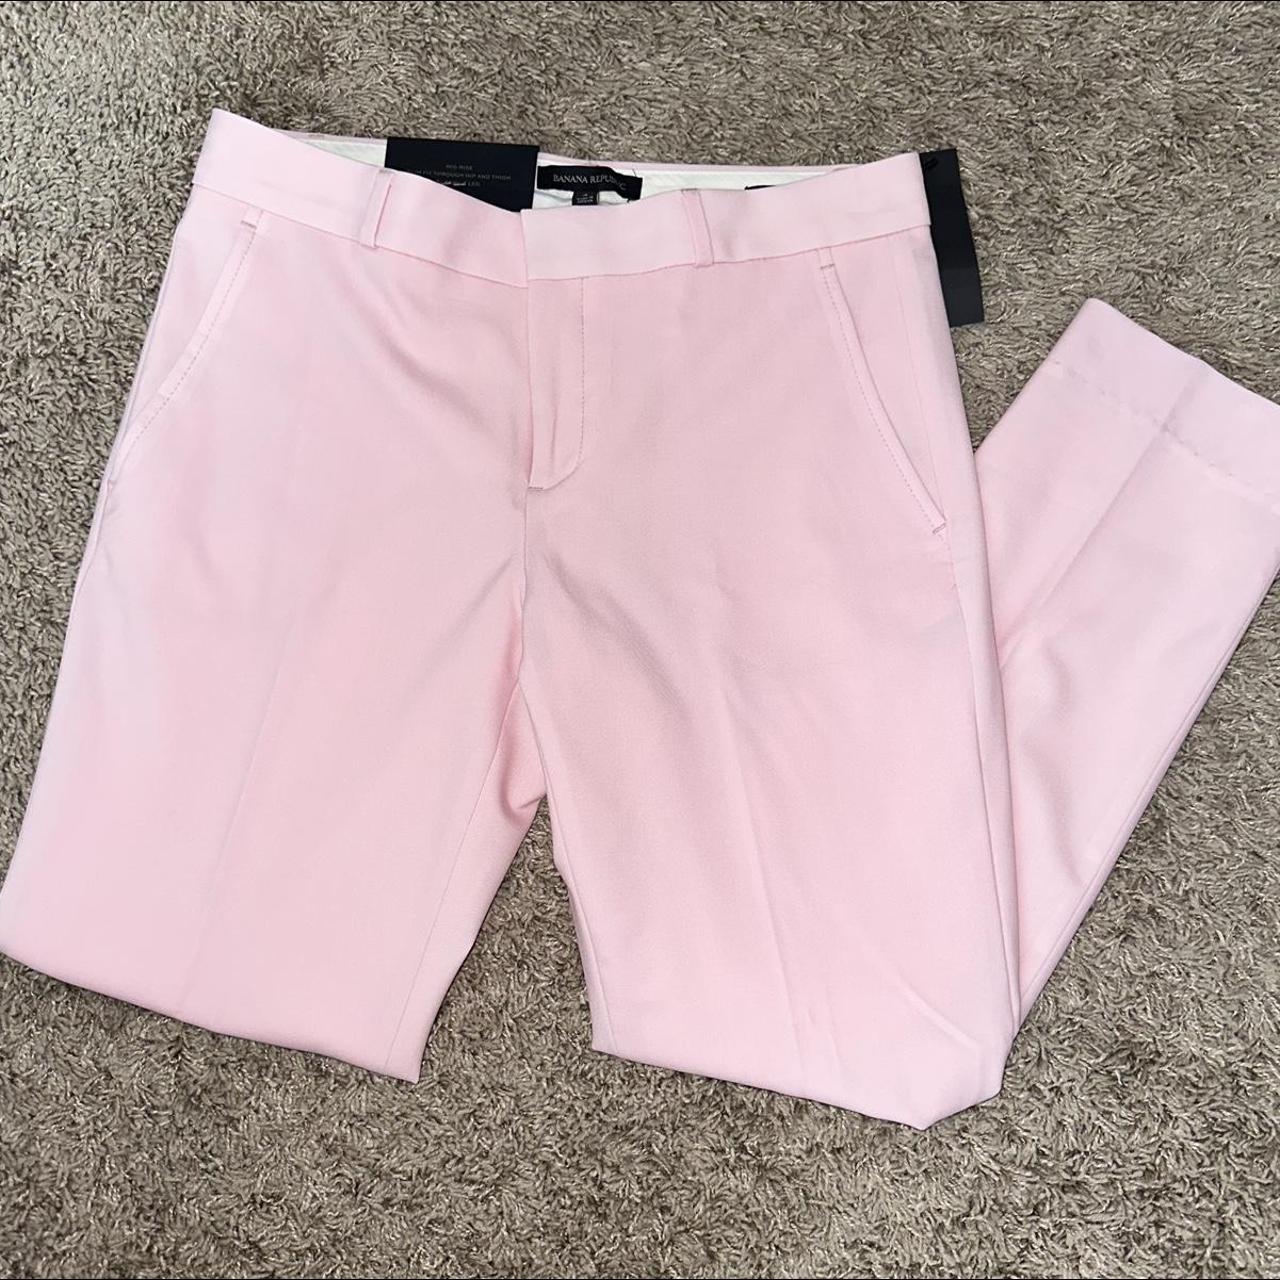 Which shirt matches pink pants? - Quora